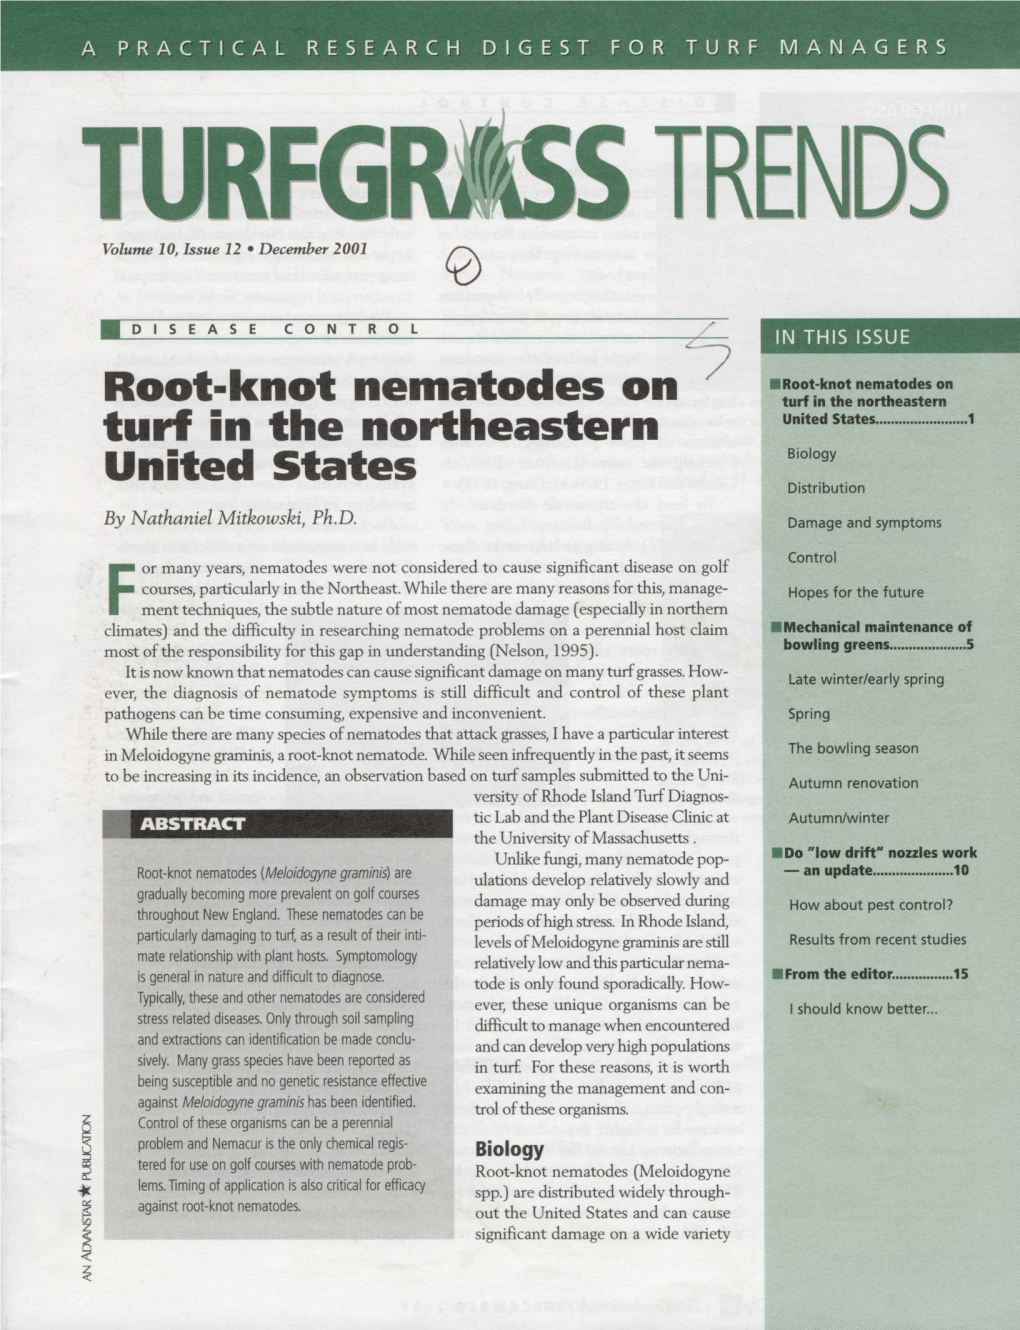 Root-Knot Nematodes on Turf in the Northeastern United States